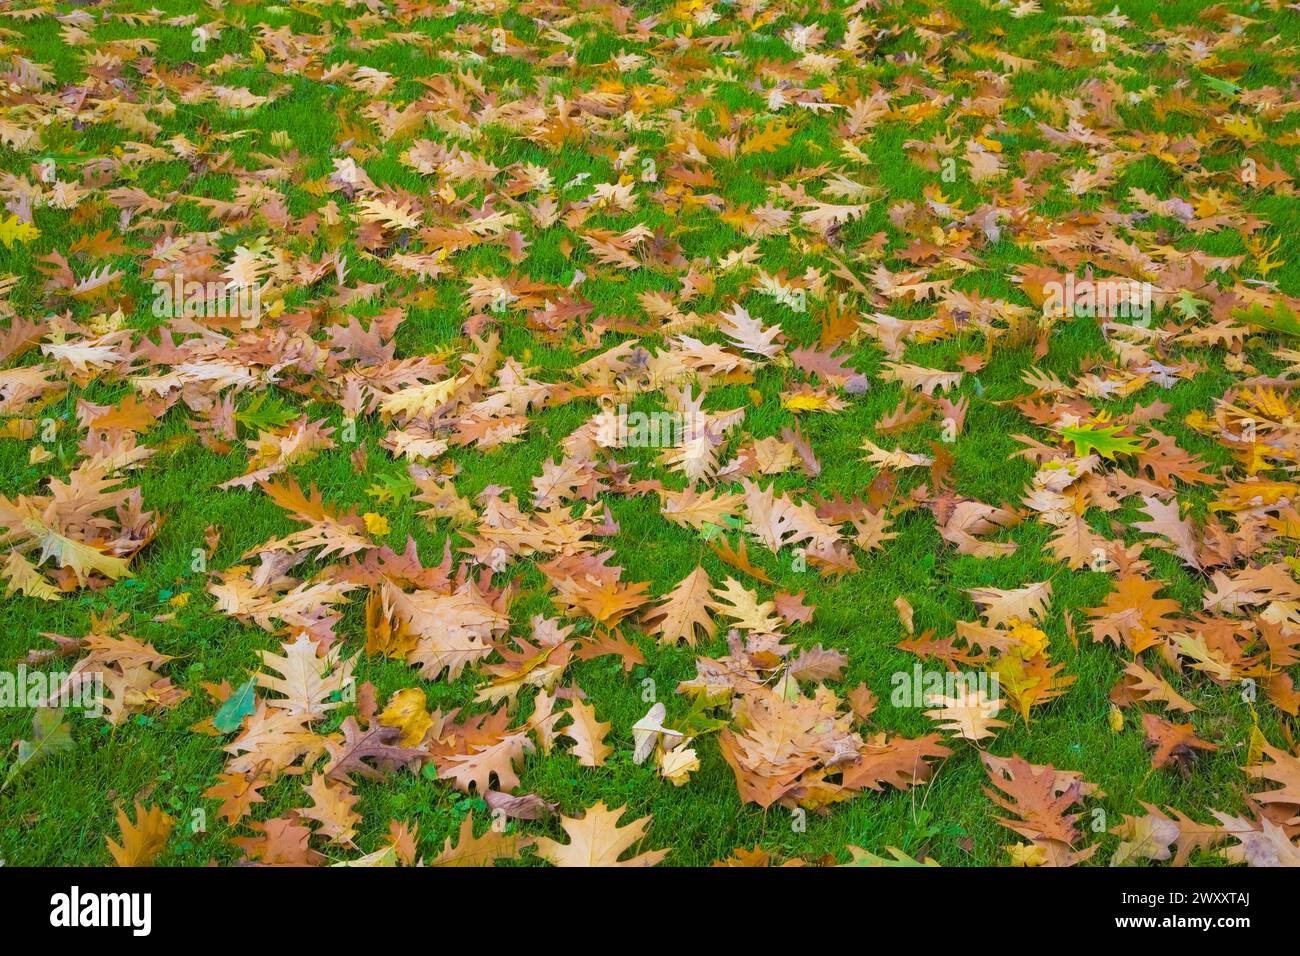 Close-up of fallen brown and yellow Quercus, Oak tree leaves on Poa pratensis, Kentucky Bluegrass lawn in autumn, Quebec, Canada Stock Photo